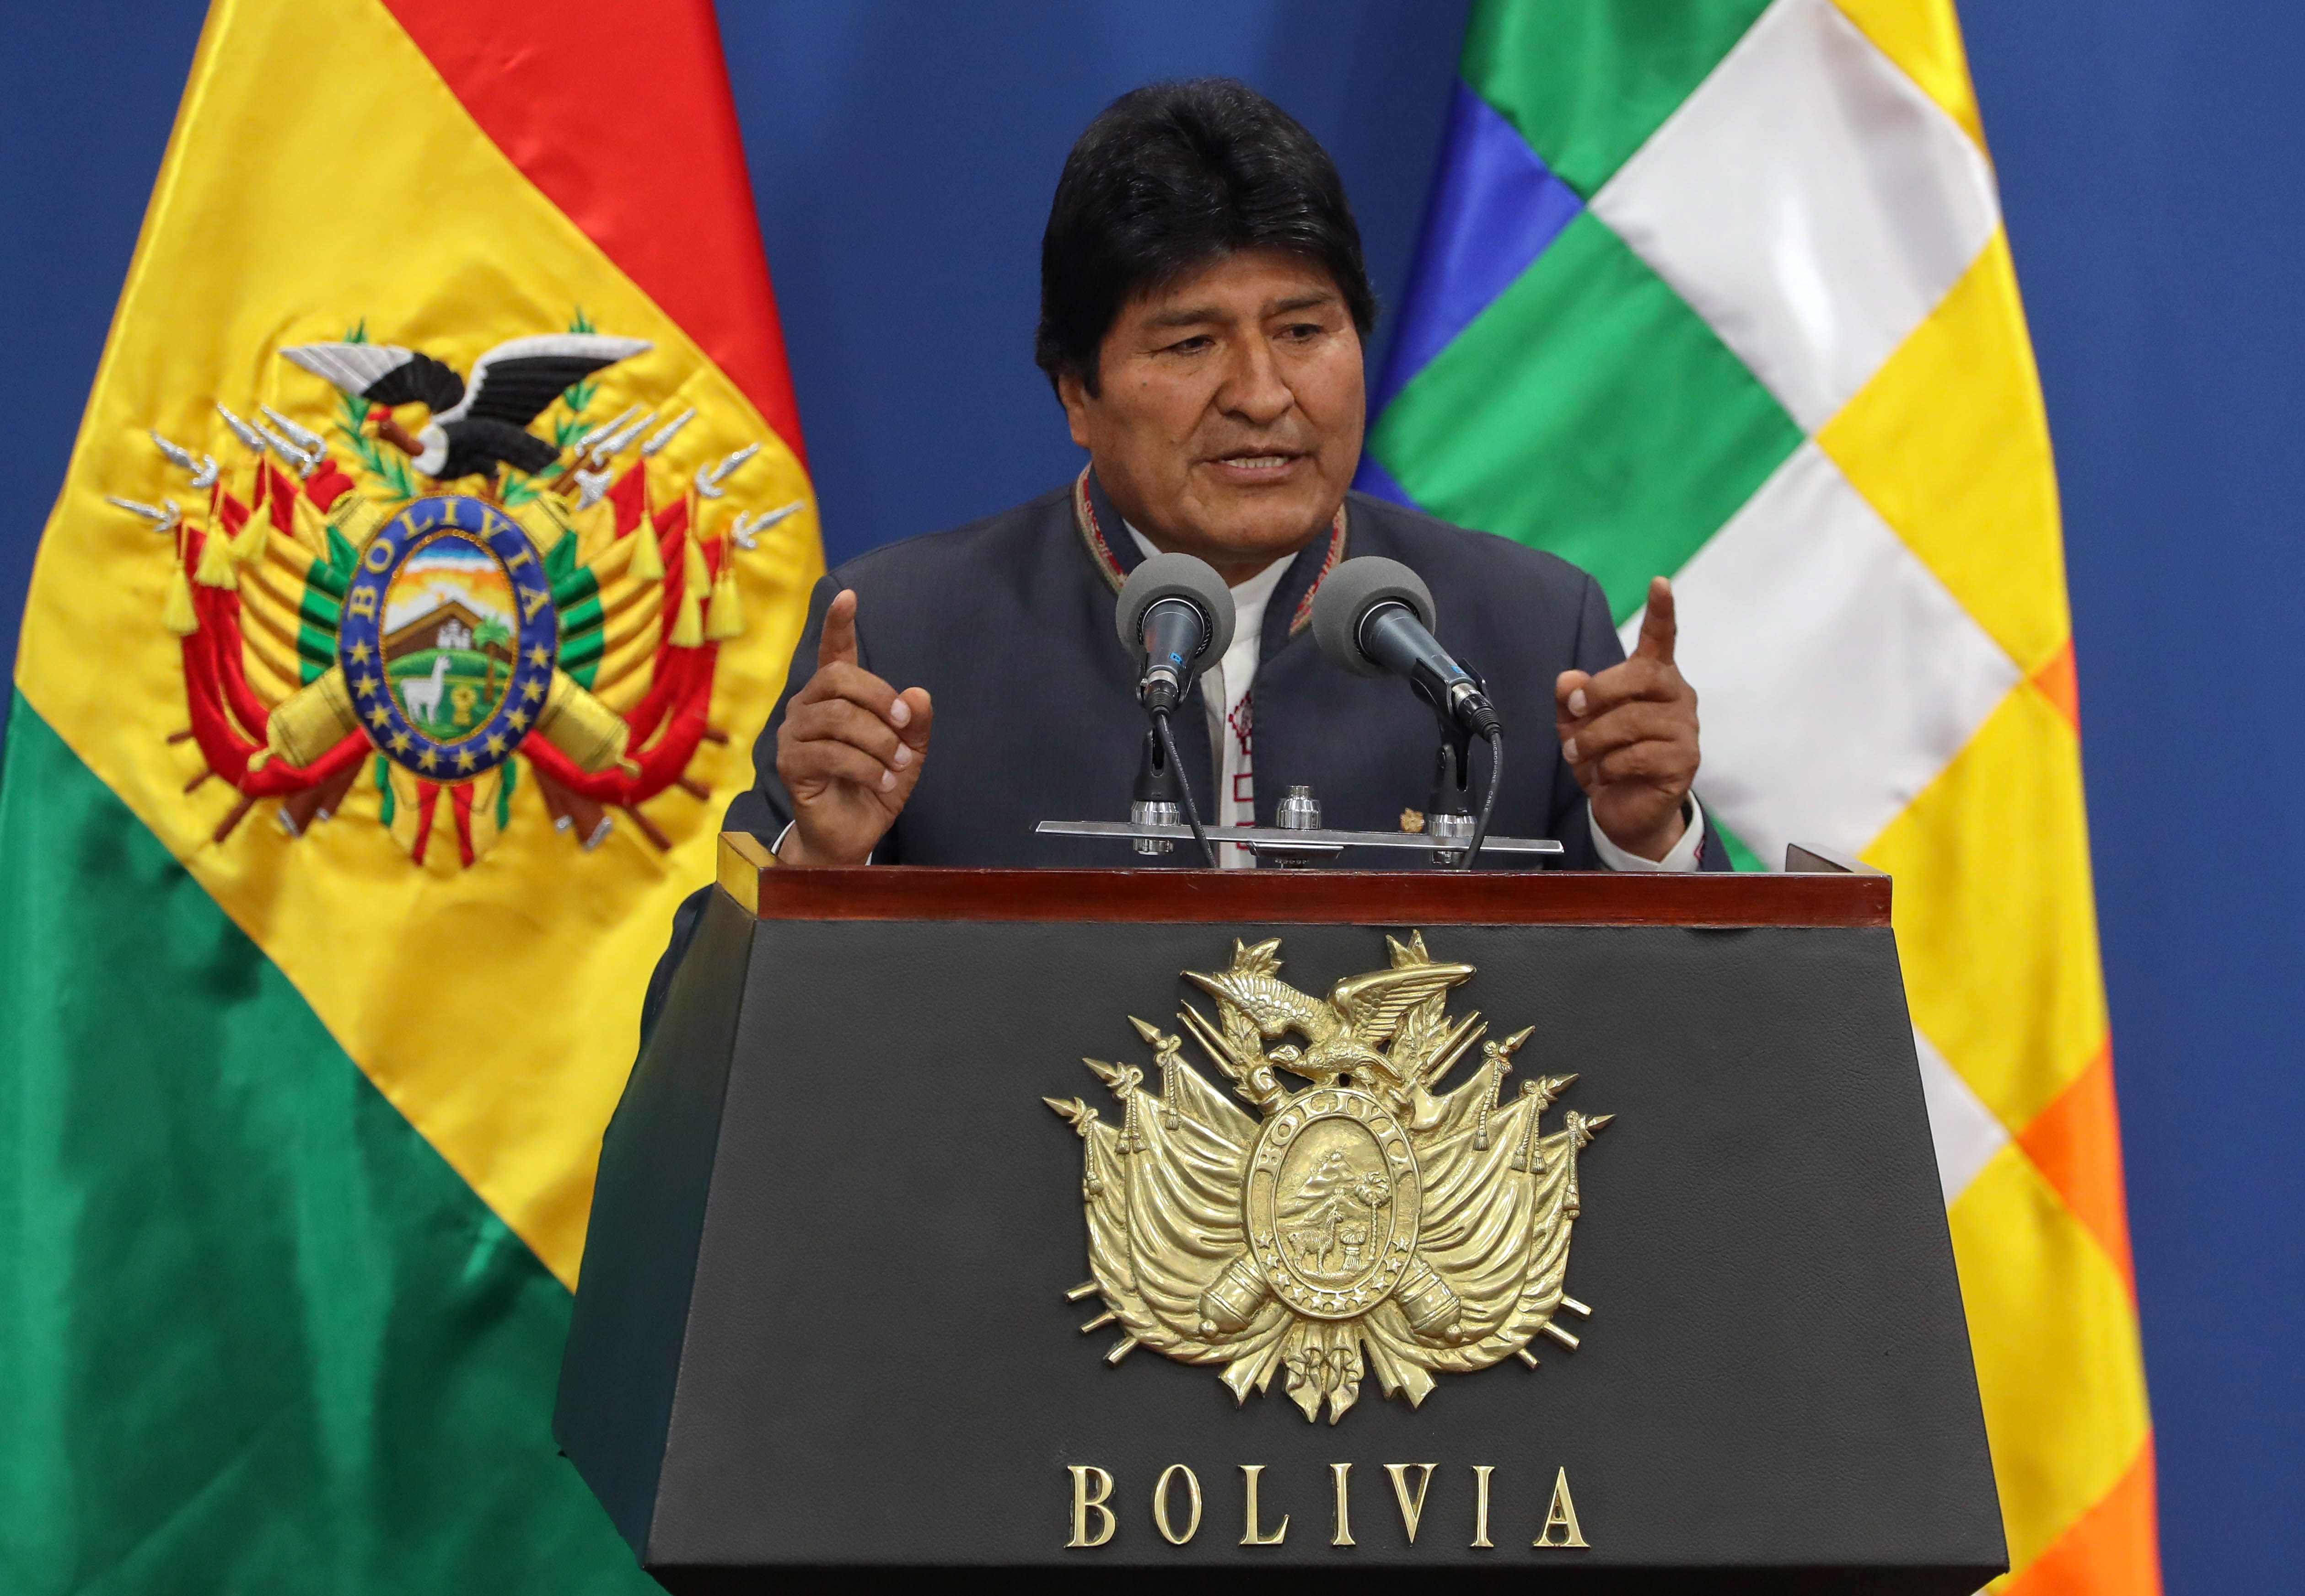 epa07985789 (FILE) - President of Bolivia Evo Morales delivers a speech in La Paz, Bolivia, 31 October 2019. Morales has called a new election after an international audit questioned the result of last month's race.  EPA/Martin Alipaz